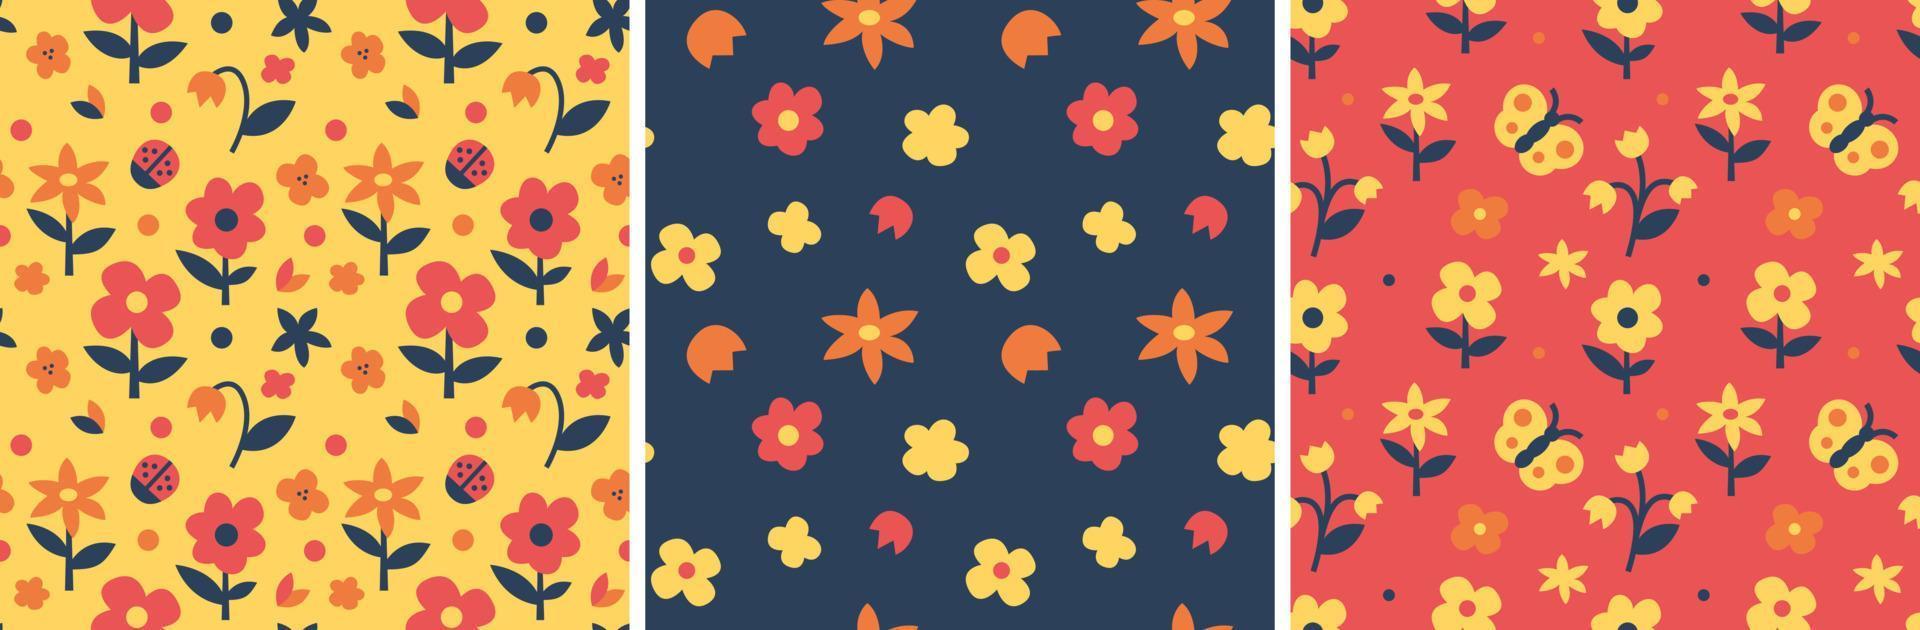 Abstract seamless pattern with flowers, ladybug and butterfly vector